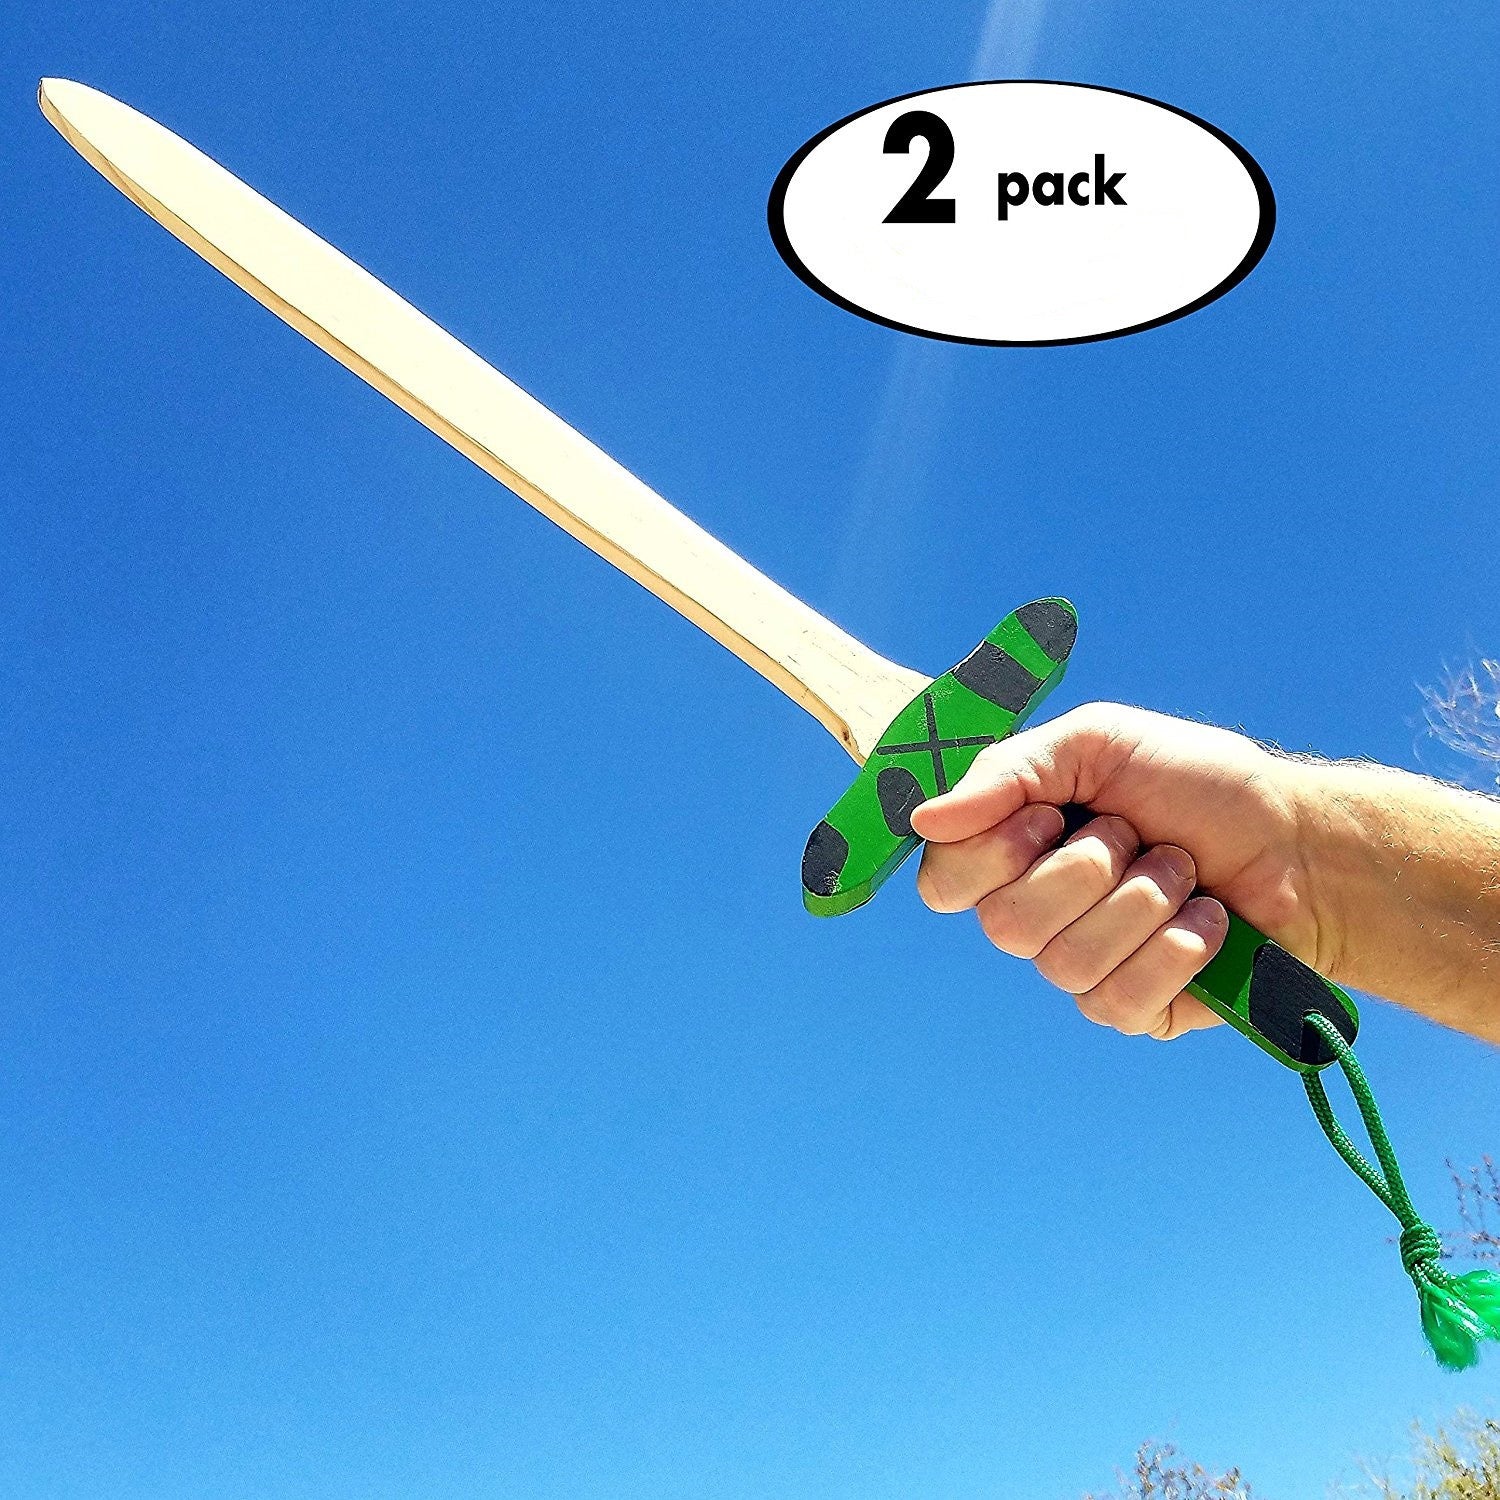 Green and Black Camo Toy Wooden Sword 2-Pack